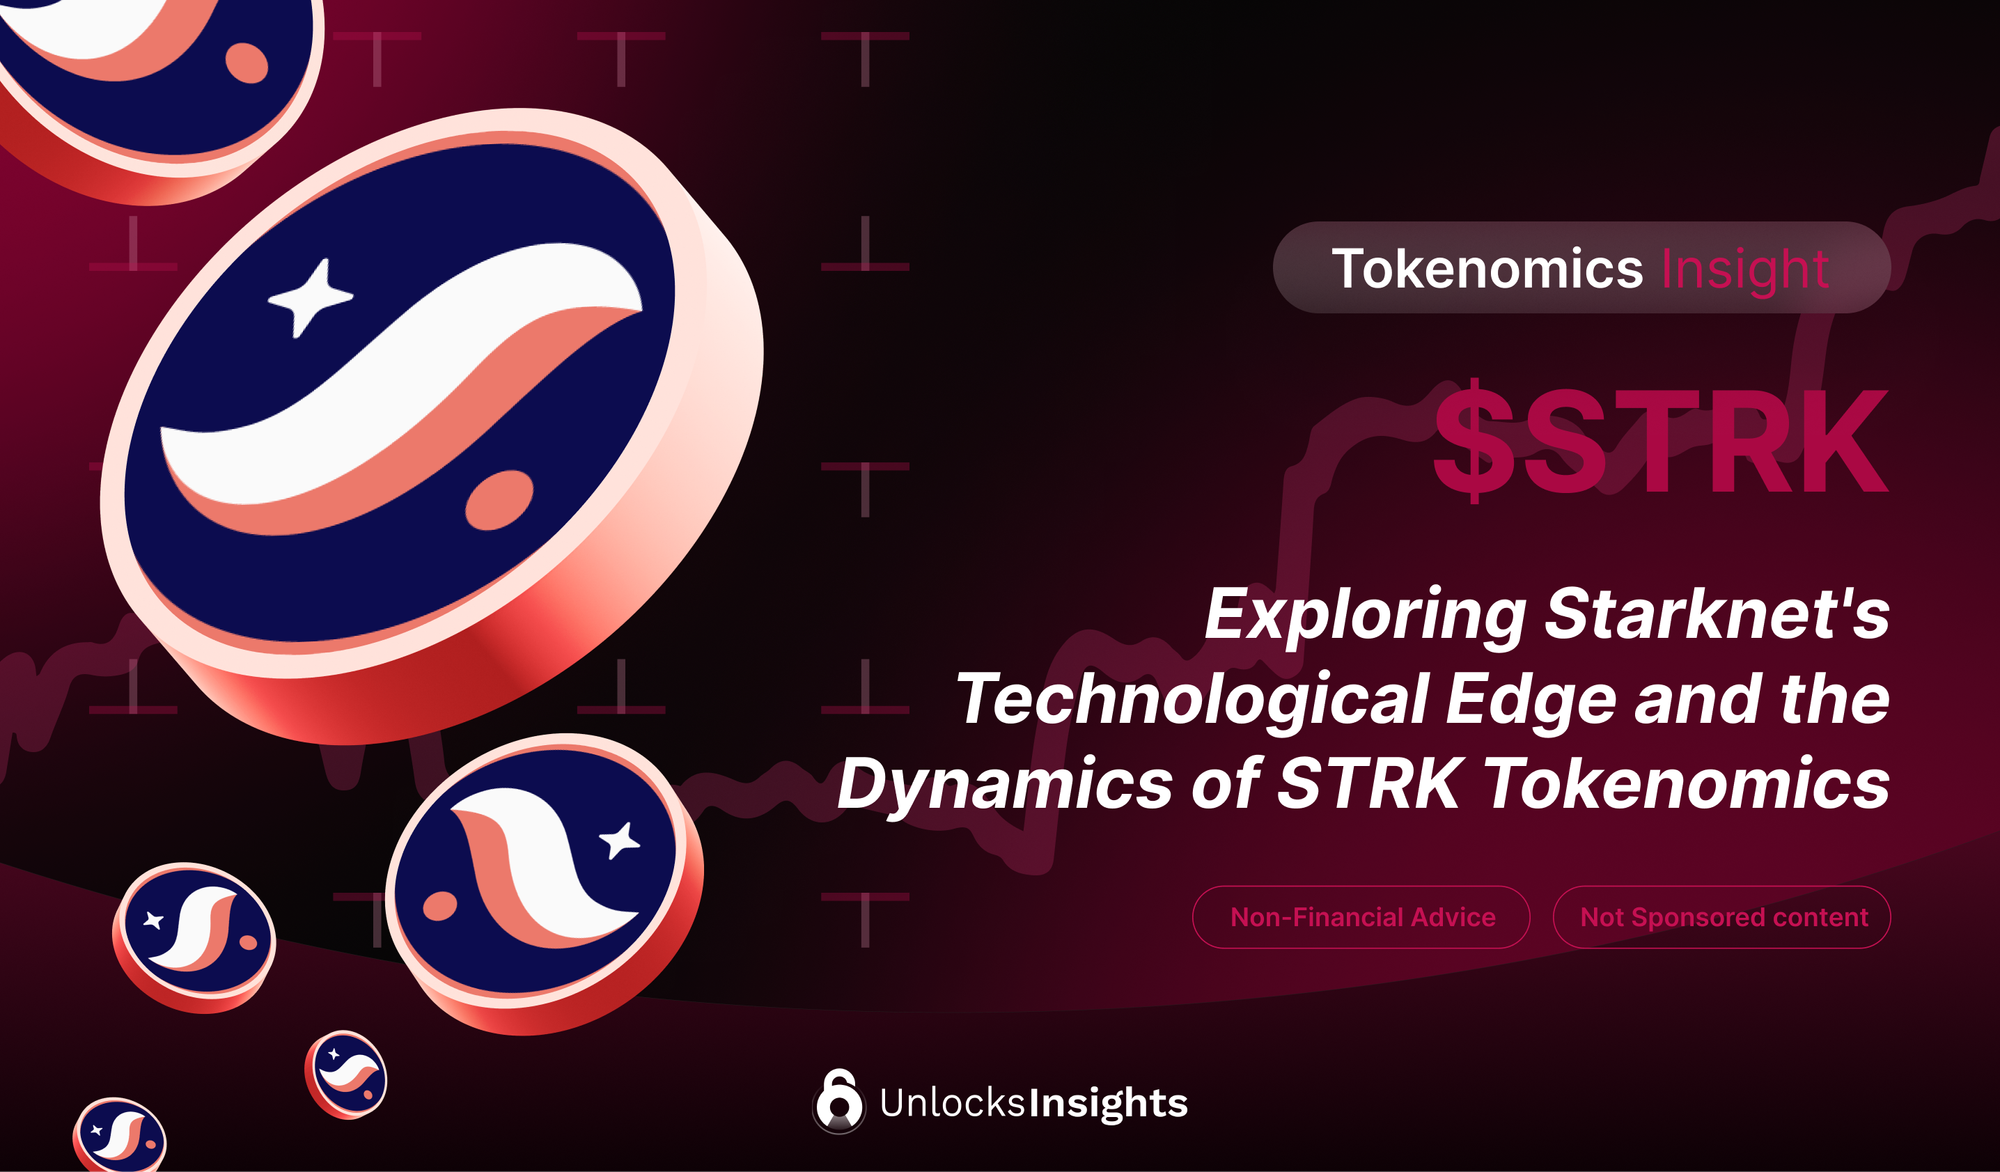 Exploring Starknet's Technological Edge and the Dynamics of STRK Tokenomics